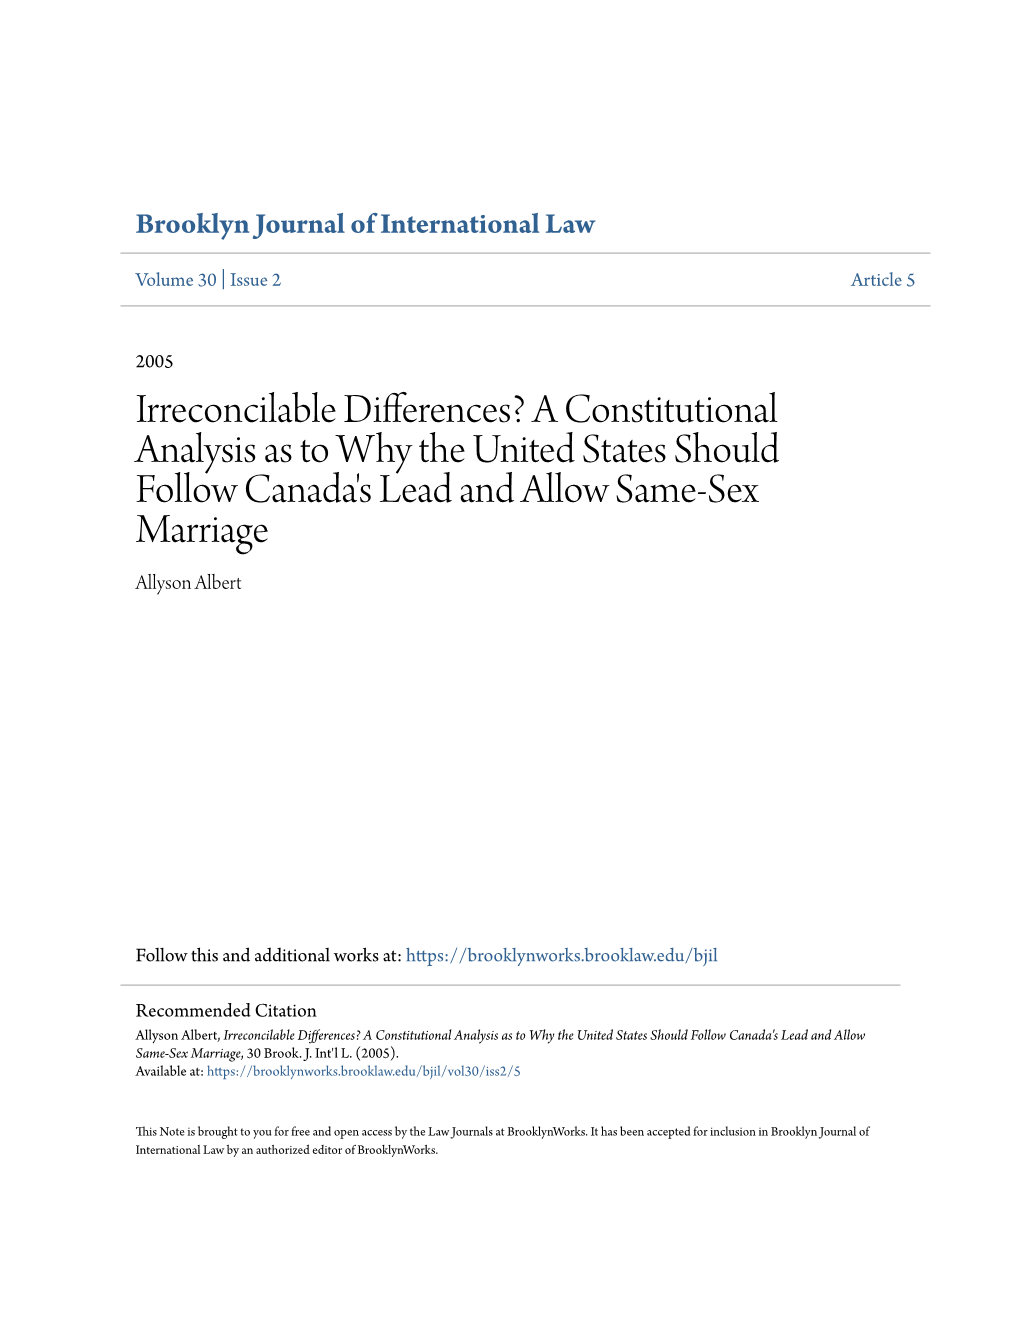 Irreconcilable Differences? a Constitutional Analysis As to Why the United States Should Follow Canada's Lead and Allow Same-Sex Marriage Allyson Albert